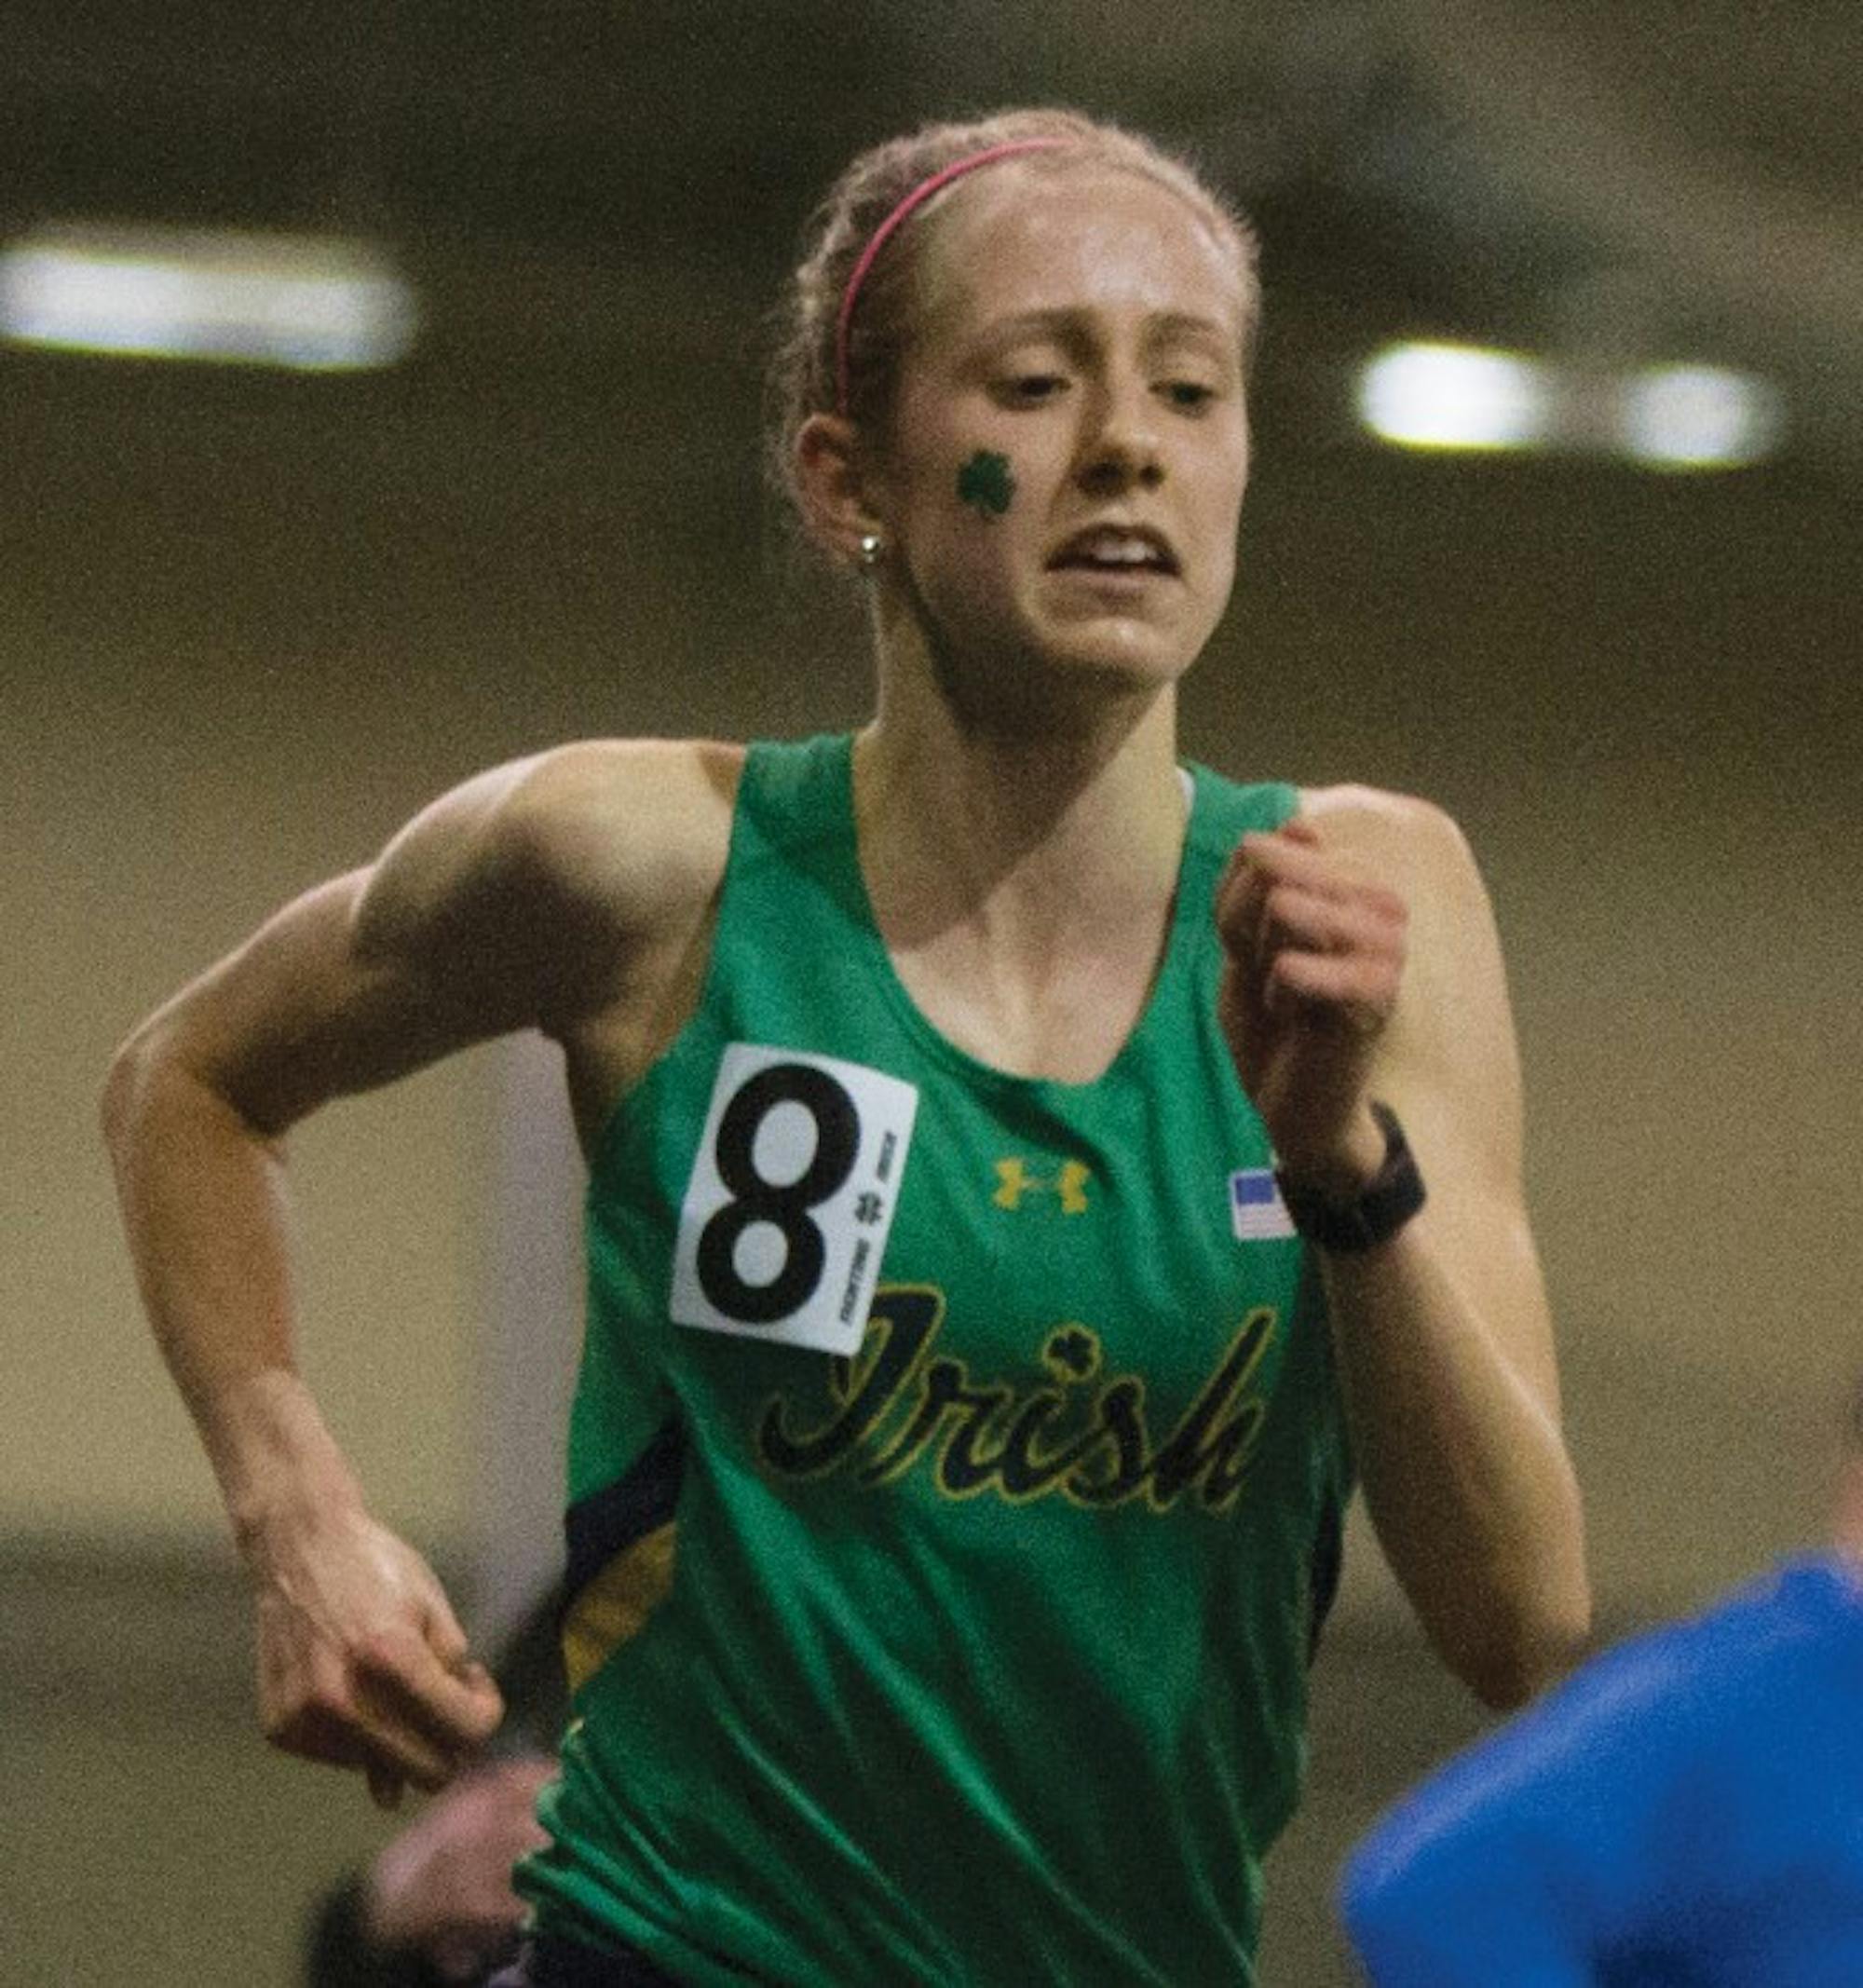 Irish sophomore Anna Rohrer competes in the 3,000-meter race at Loftus Sports Complex on Saturday.